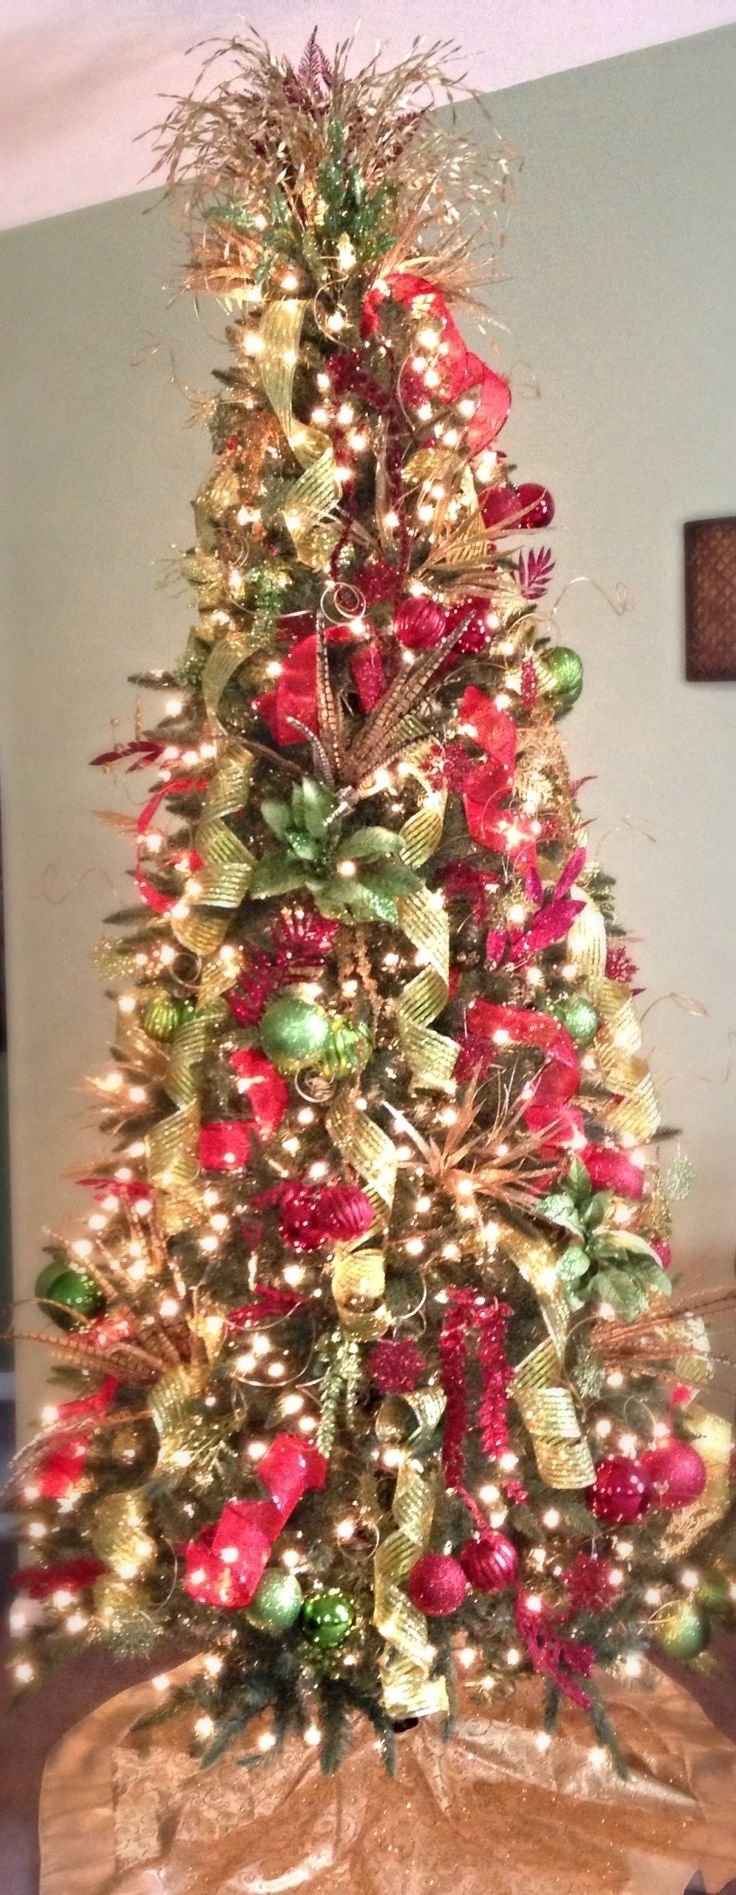 10 Stunning Red Green And Gold Christmas Tree Ideas 420 best christmas traditional red green and gold images on 2022